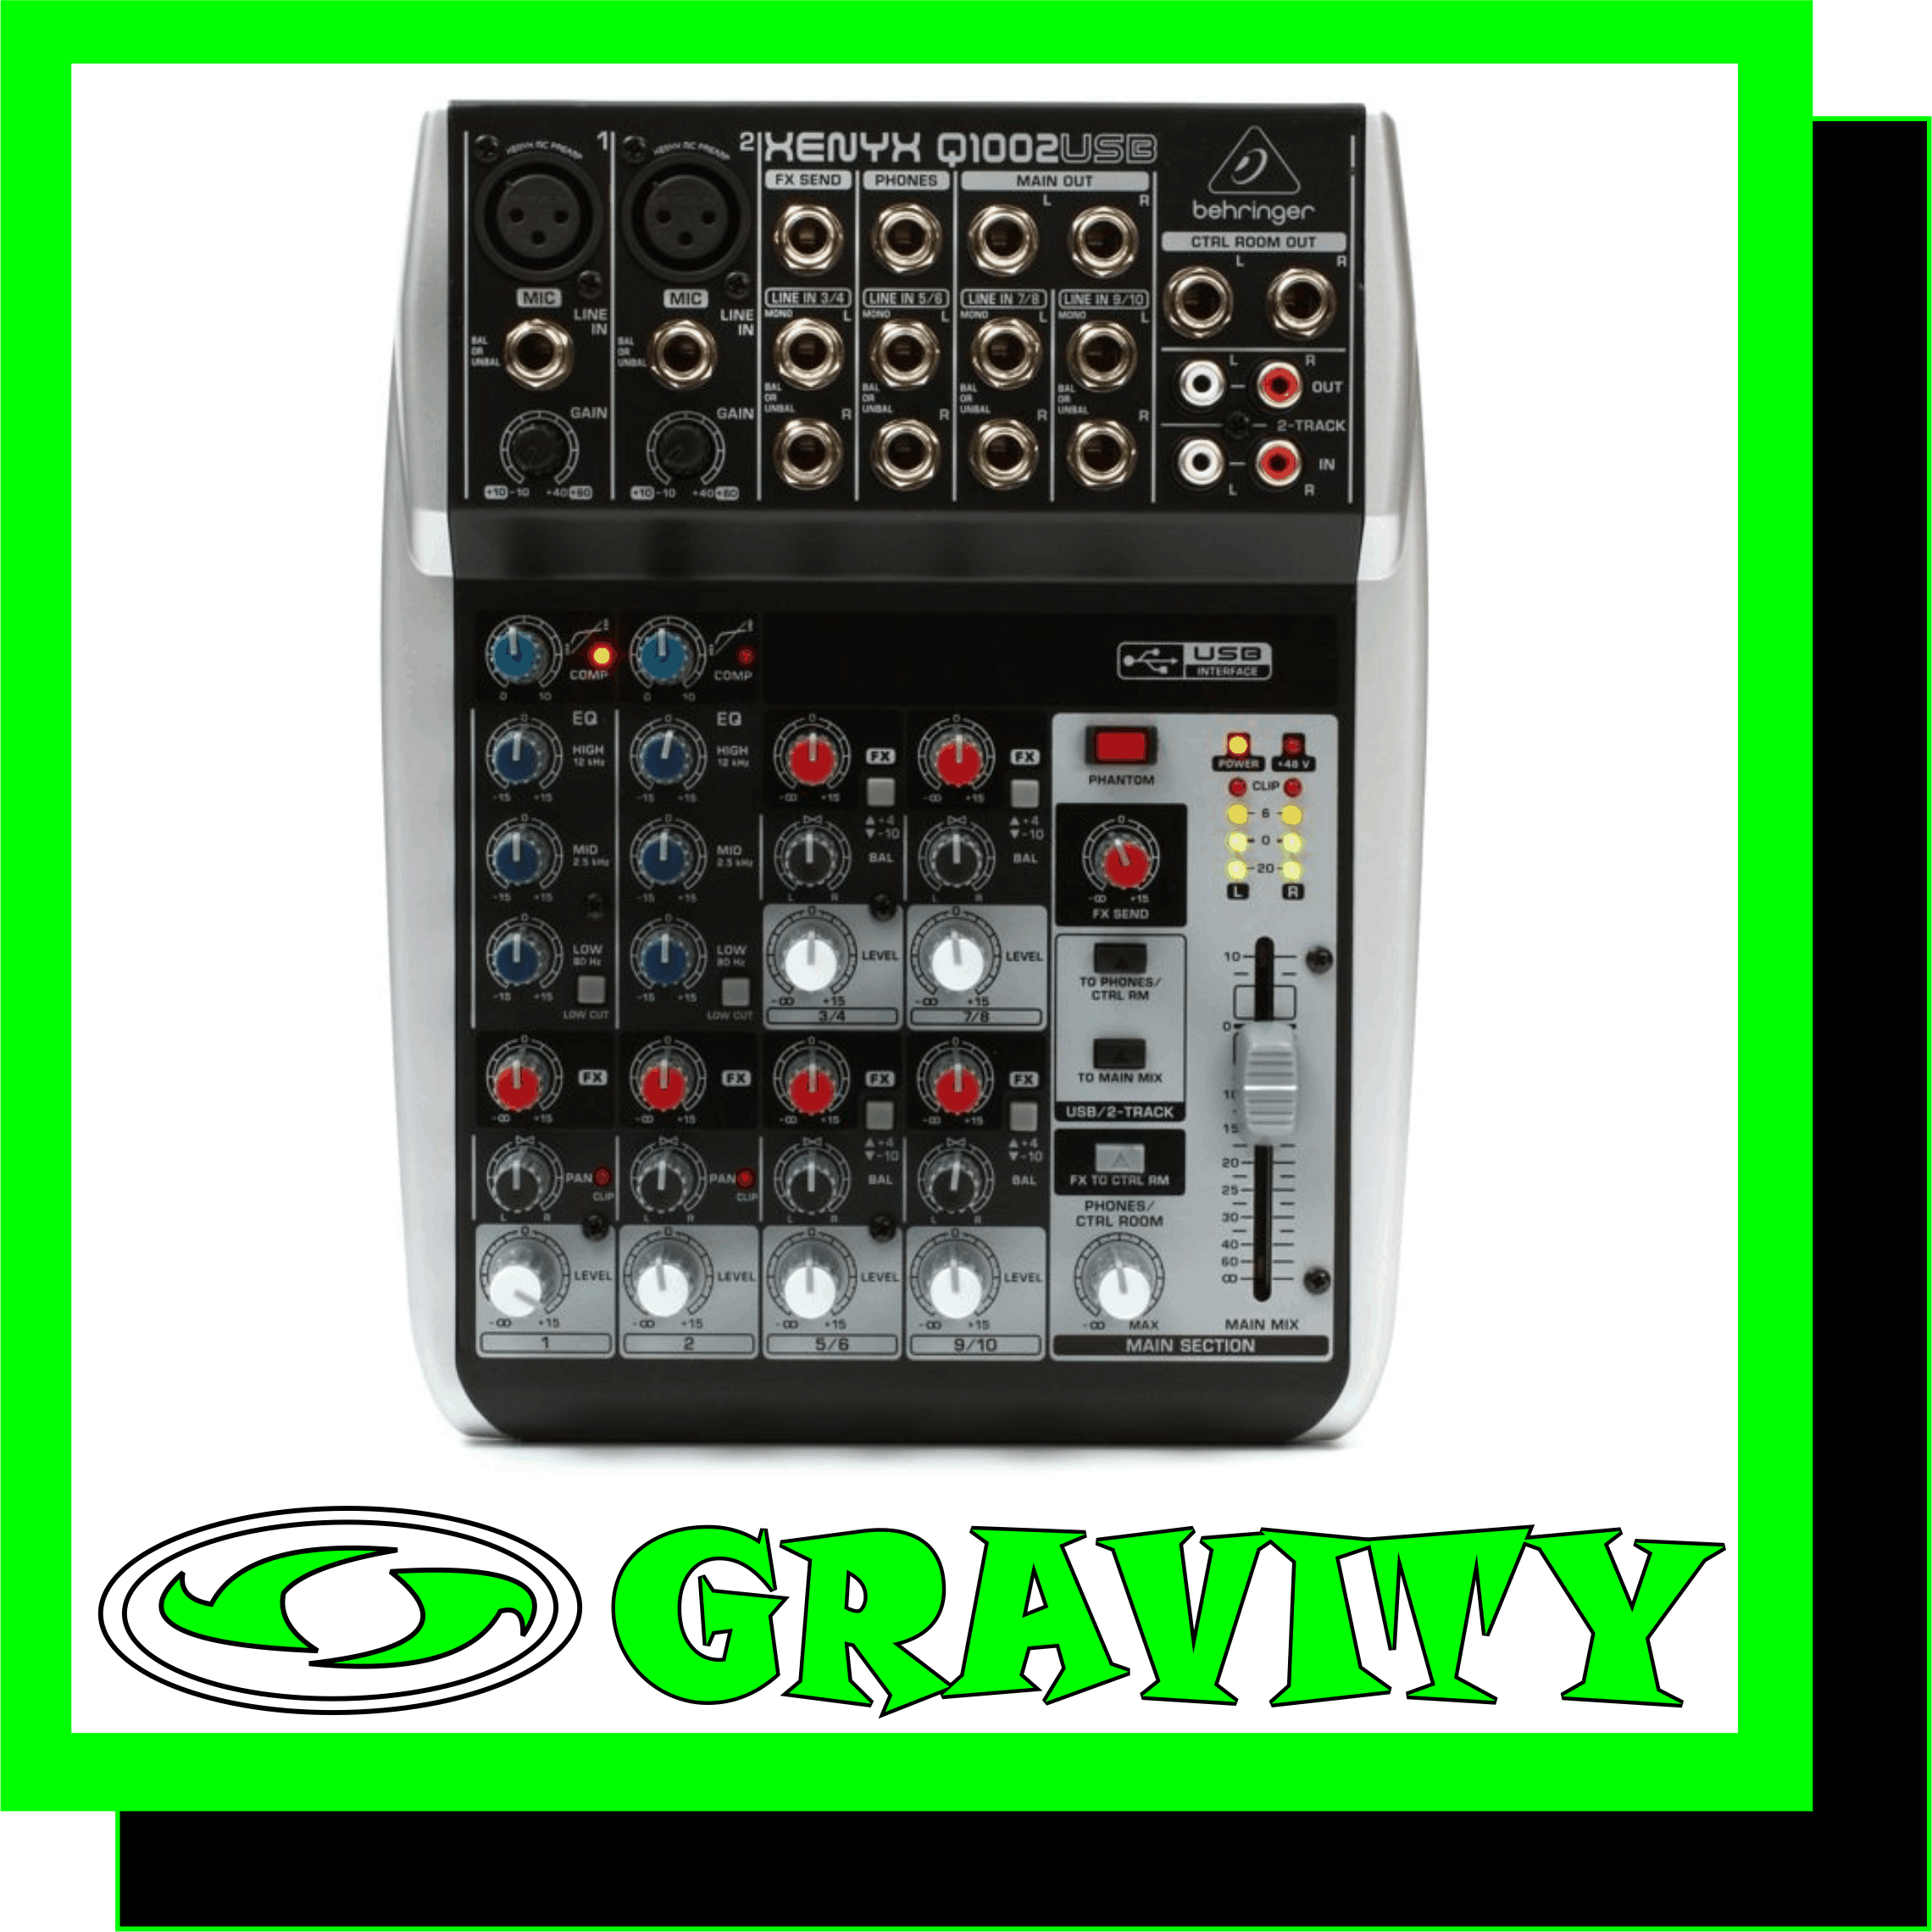 Behringer XENYX Q1002USB 10-Input 2-Bus Mixer  Product Features: -Premium ultra-low noise, high headroom analog mixer -2 state-of-the-art XENYX Mic Preamps comparable to stand-alone boutique preamps -Studio-grade compressors with super-easy “one-knob” functionality and control LED for professional vocal and instrumental sound -Built-in stereo USB/Audio Interface to connect directly to your computer. Free audio recording, editing and podcasting software plus 150 instrument/effect plug-ins  downloadable at behringer.com -Neo-classic “British” 3-band EQs for warm and musical sound -1 post fader FX send per channel for external FX devices -Main mix outputs plus separate control room, phones and 2-Track outputs -2-Track inputs assignable to main mix or control room/phones output -FX to control room function helps to monitor effect signal via headphones and control room outputs -High-quality components and exceptionally rugged construction ensure long life -Conceived and designed by BEHRINGER Germany